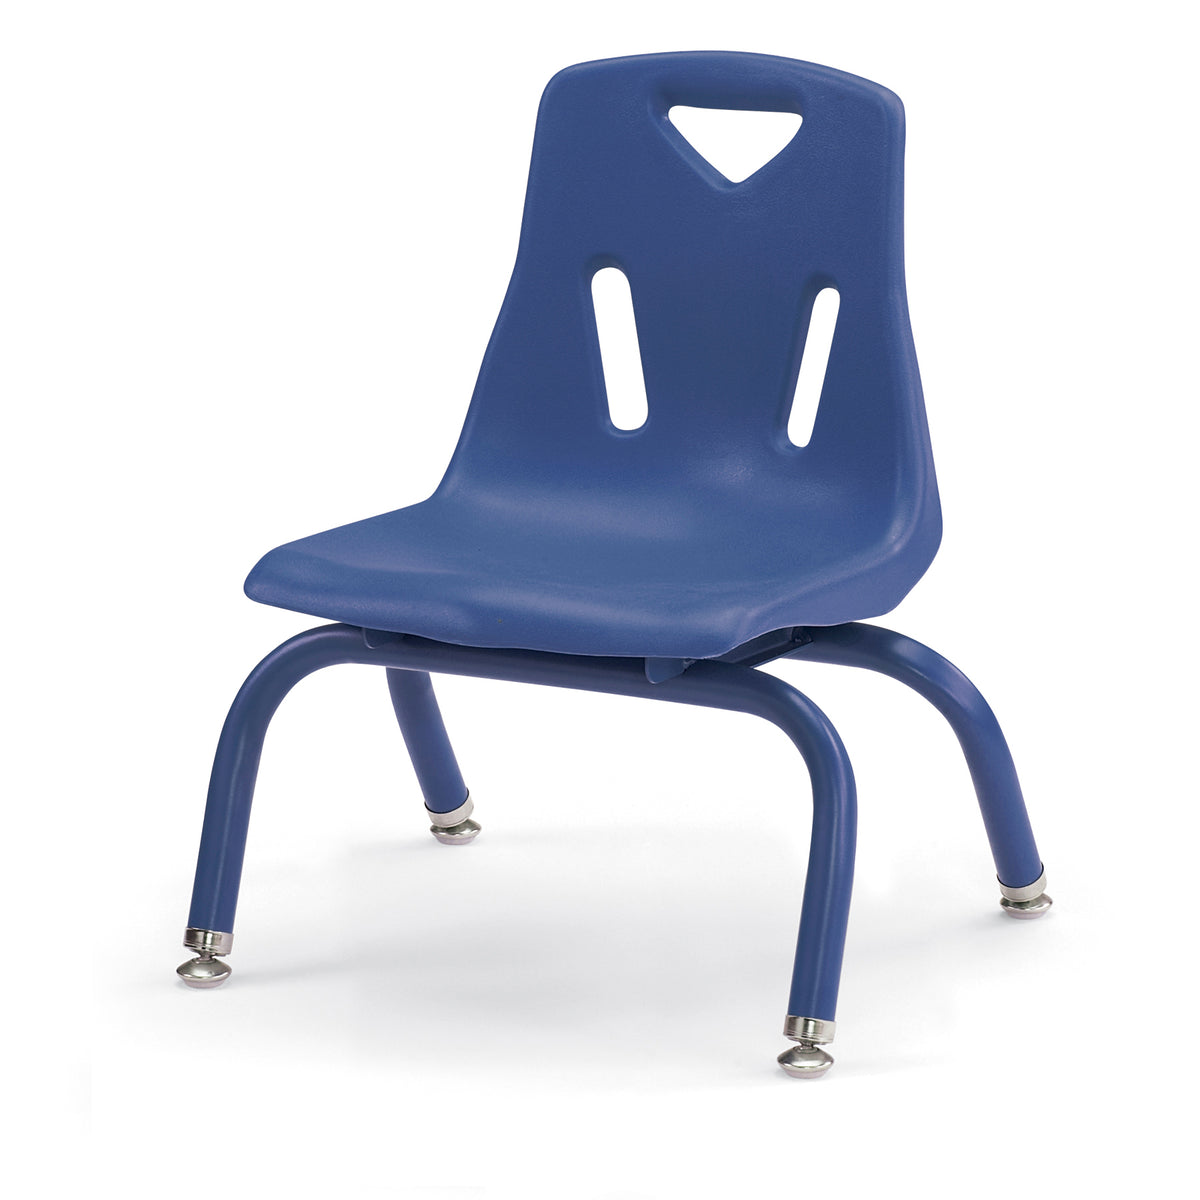 8118JC1003, Berries Stacking Chair with Powder-Coated Legs - 8" Ht - Blue